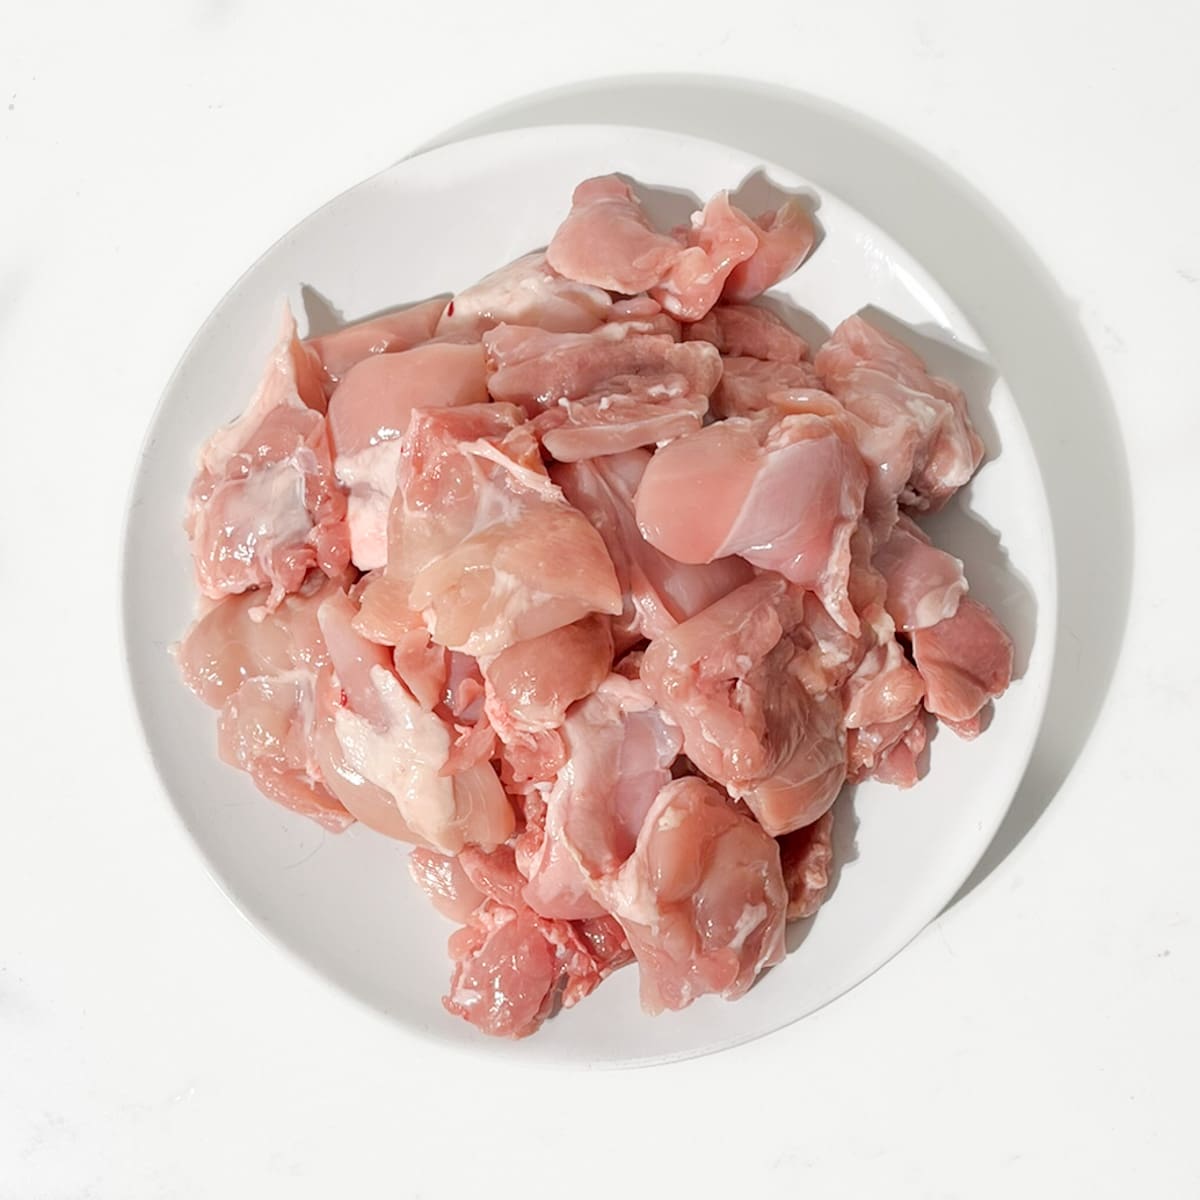 Dicing the chicken thighs into large chunks.